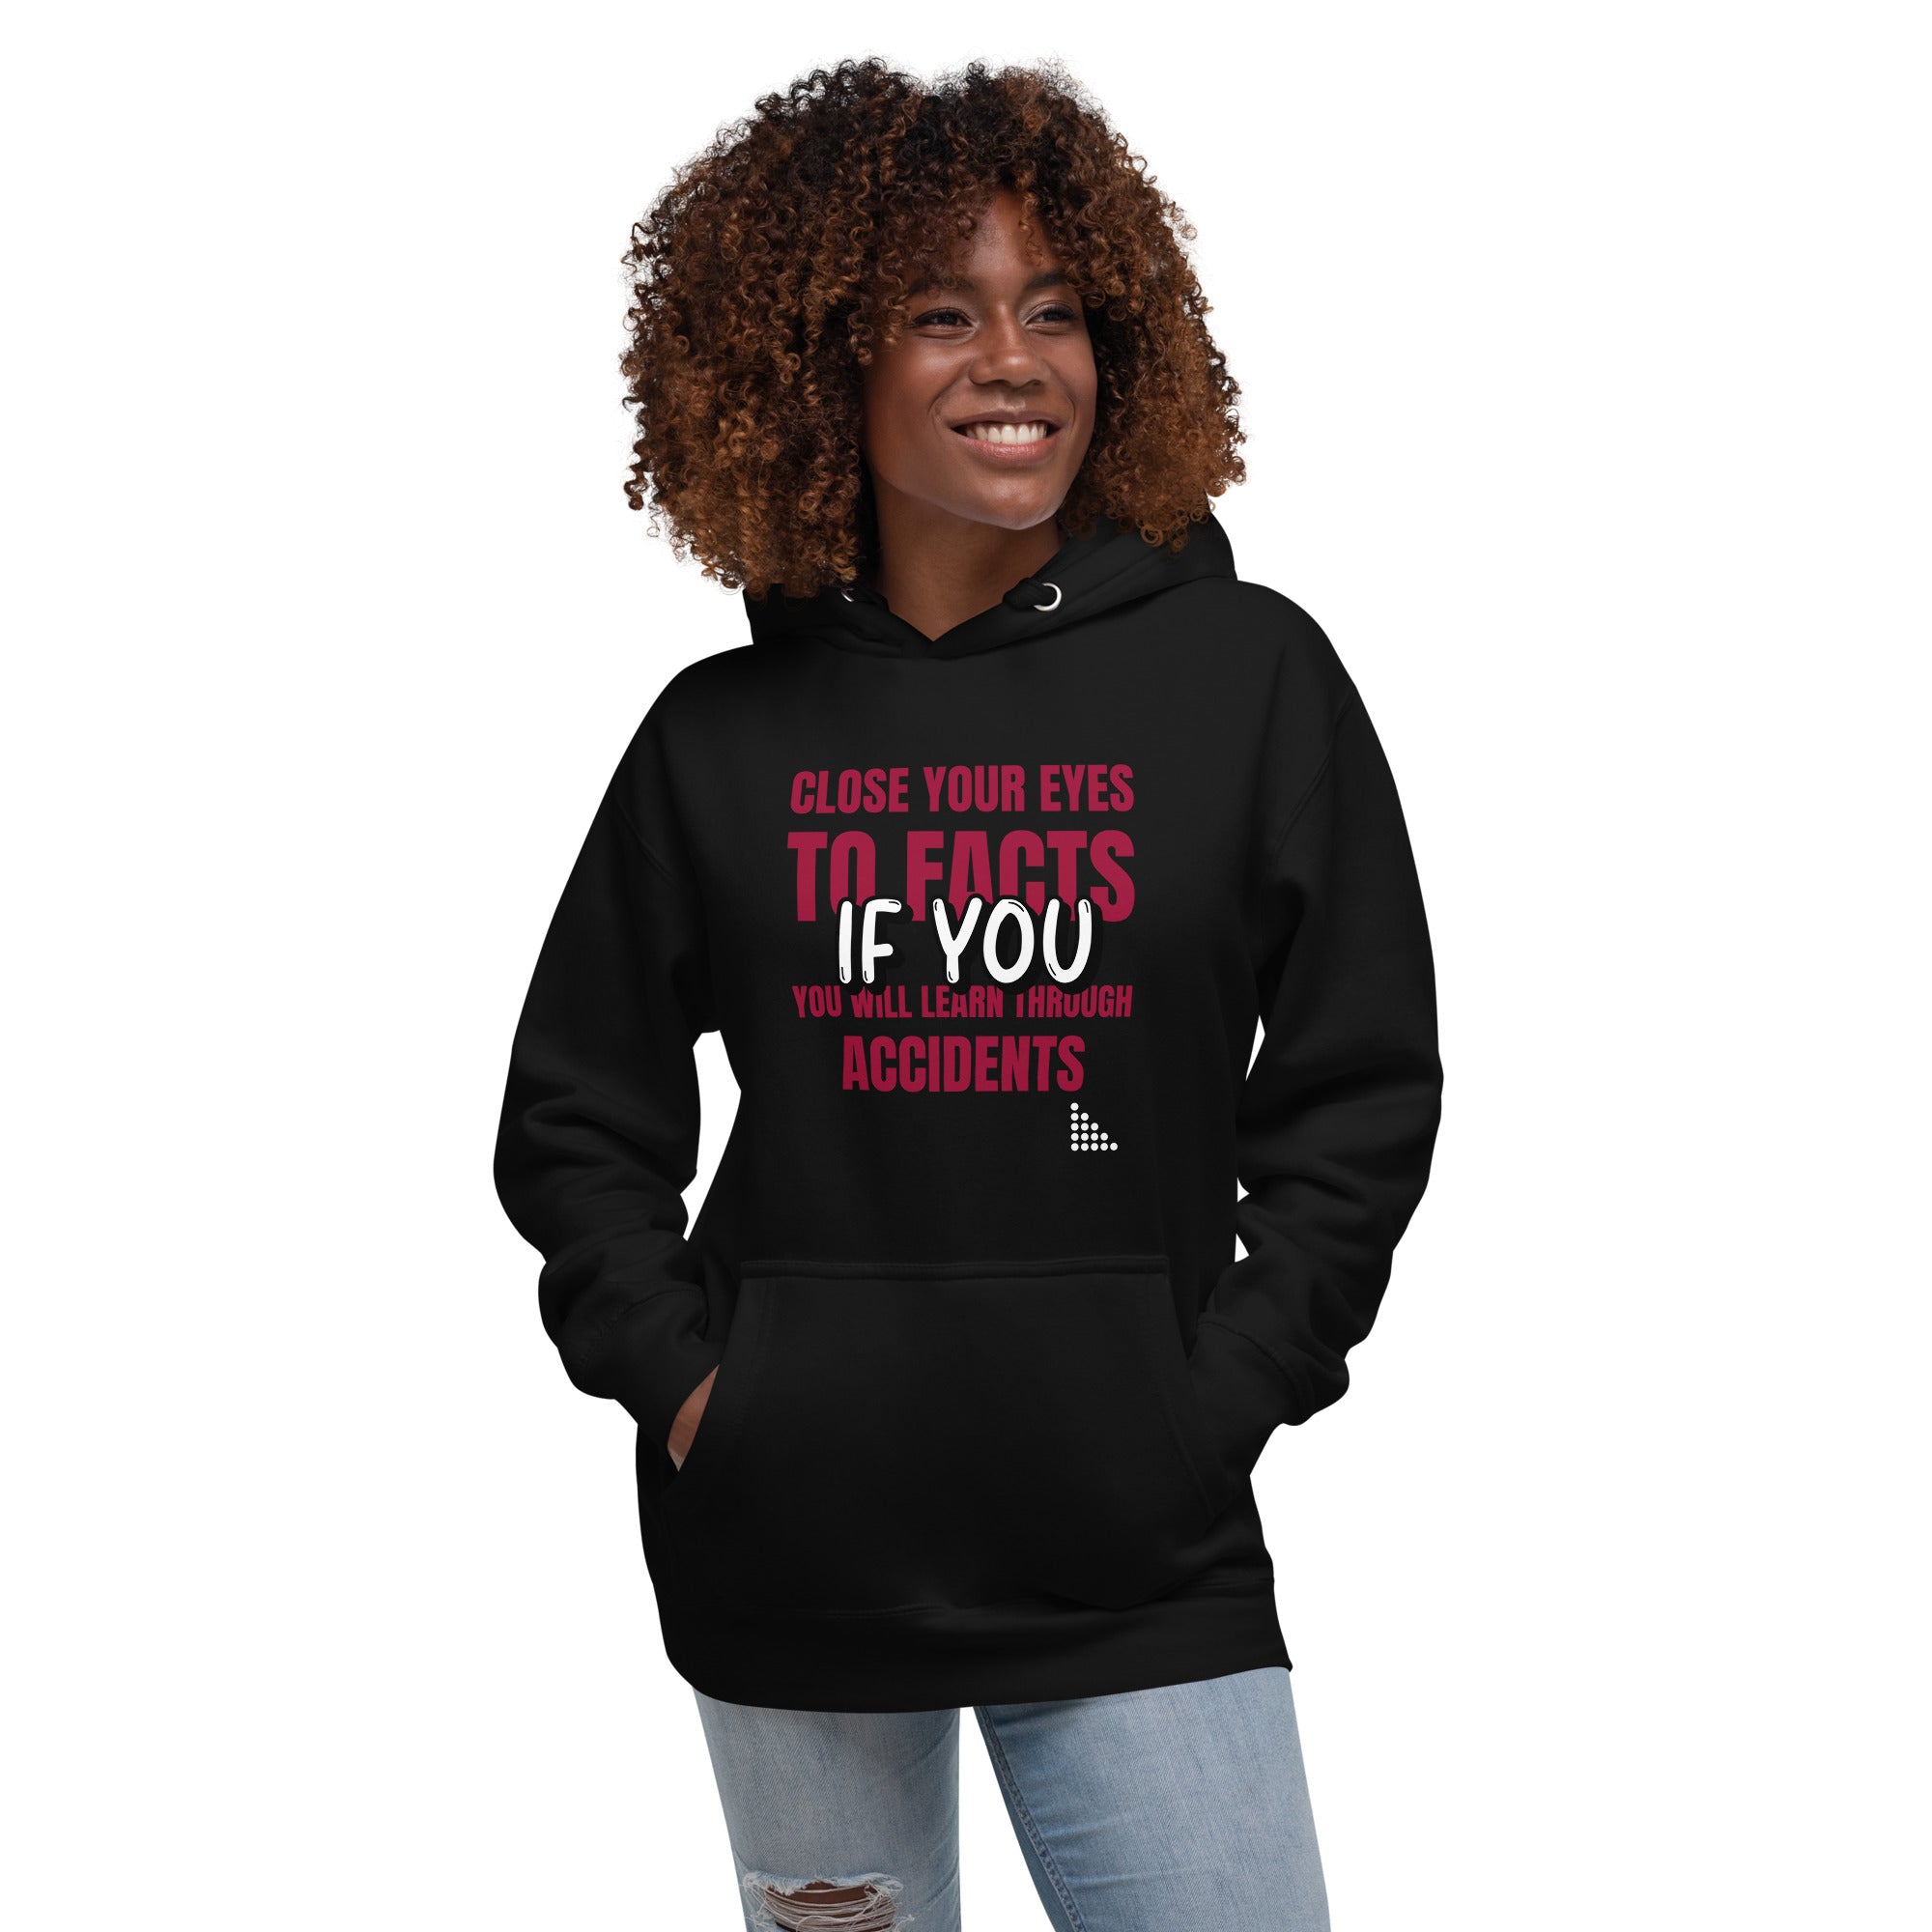 Coolest Unisex Hoodie Ever: Get Yours Now! - You Will Learn From Accidents